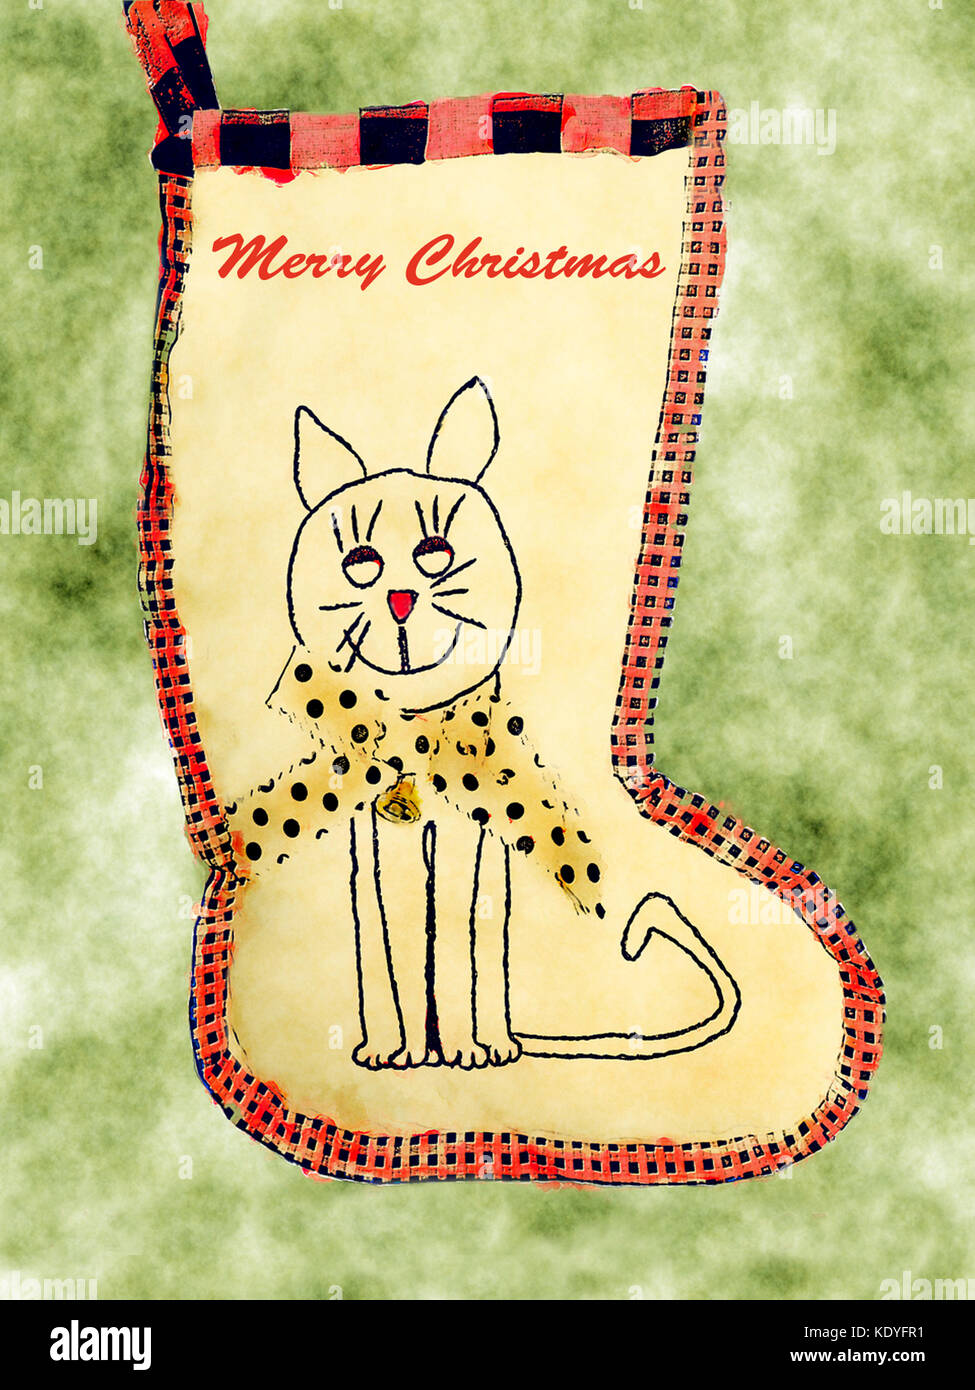 A handmade stocking with smiling cat on white with red and white trim.  Copy space on stocking for text. Stock Photo